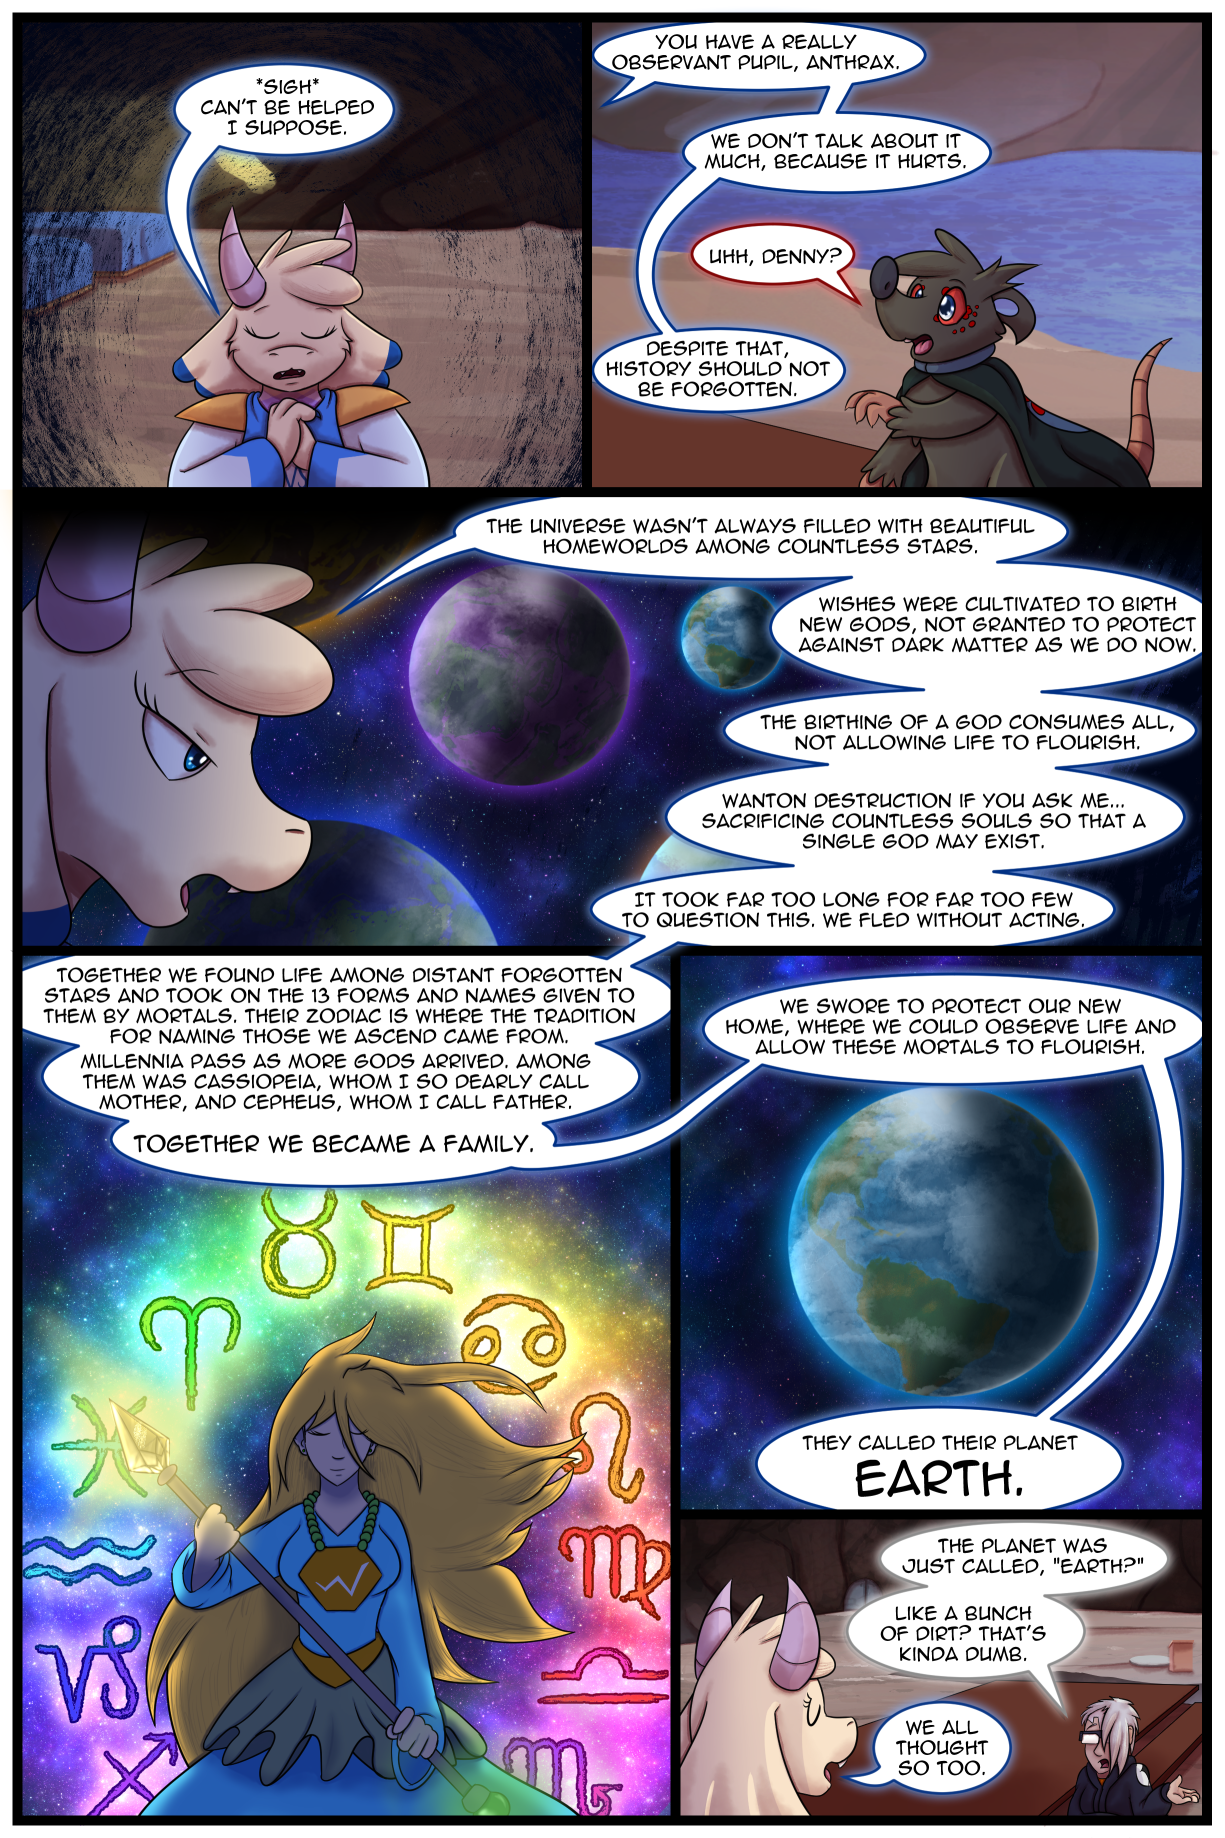 Ch5 Page 53 – Earth